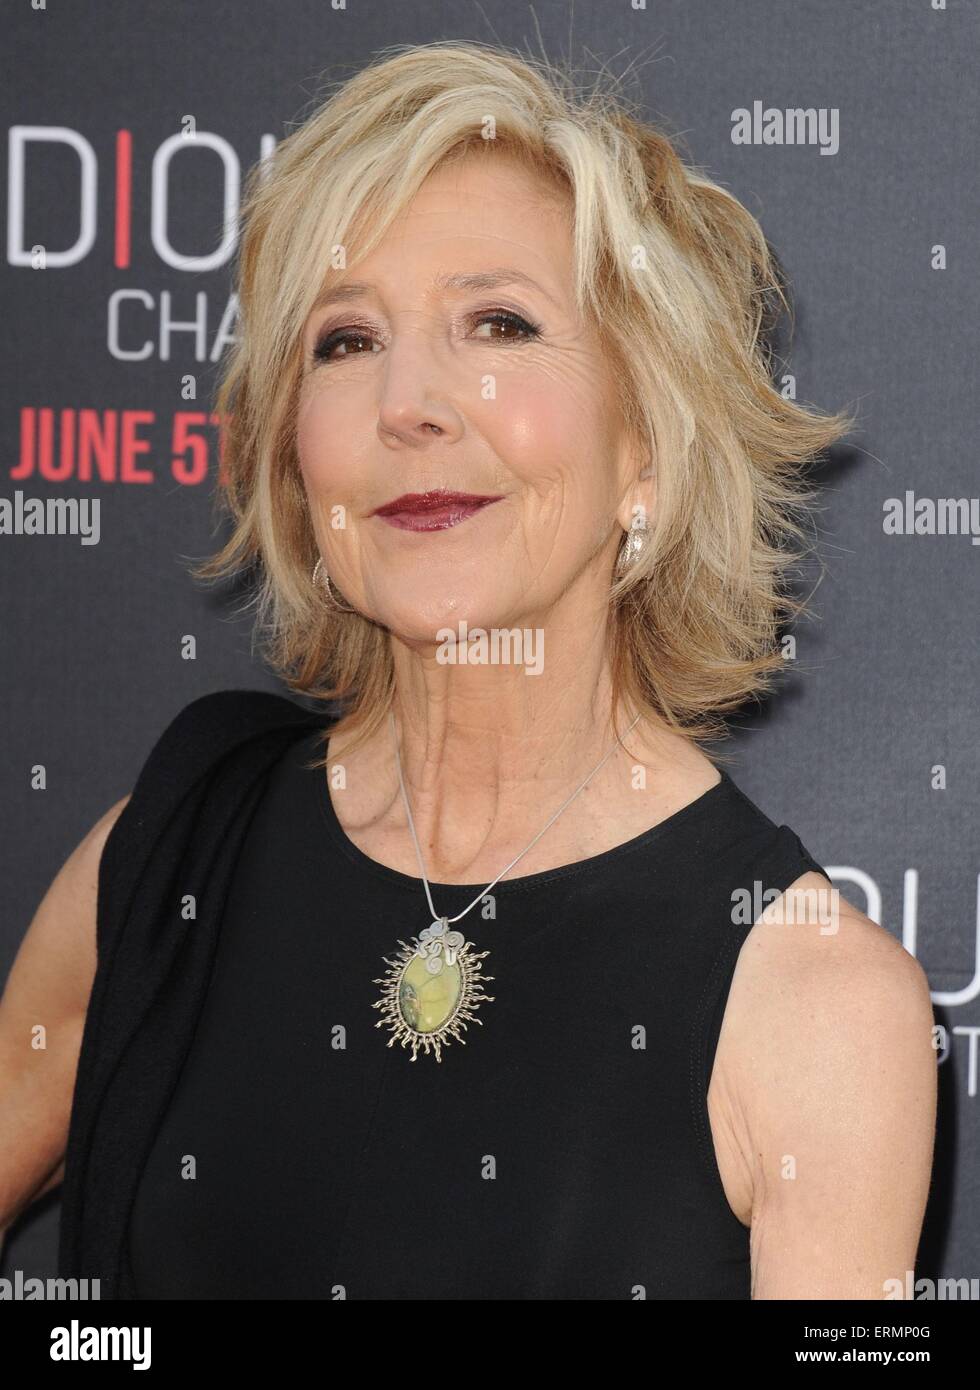 Los Angeles, CA, USA. 4th June, 2015. Lin Shaye at arrivals for INSIDIOUS: CHAPTER 3 World Premiere, TCL Chinese 6 Theatres (formerly Grauman's), Los Angeles, CA June 4, 2015. Credit:  Dee Cercone/Everett Collection/Alamy Live News Stock Photo